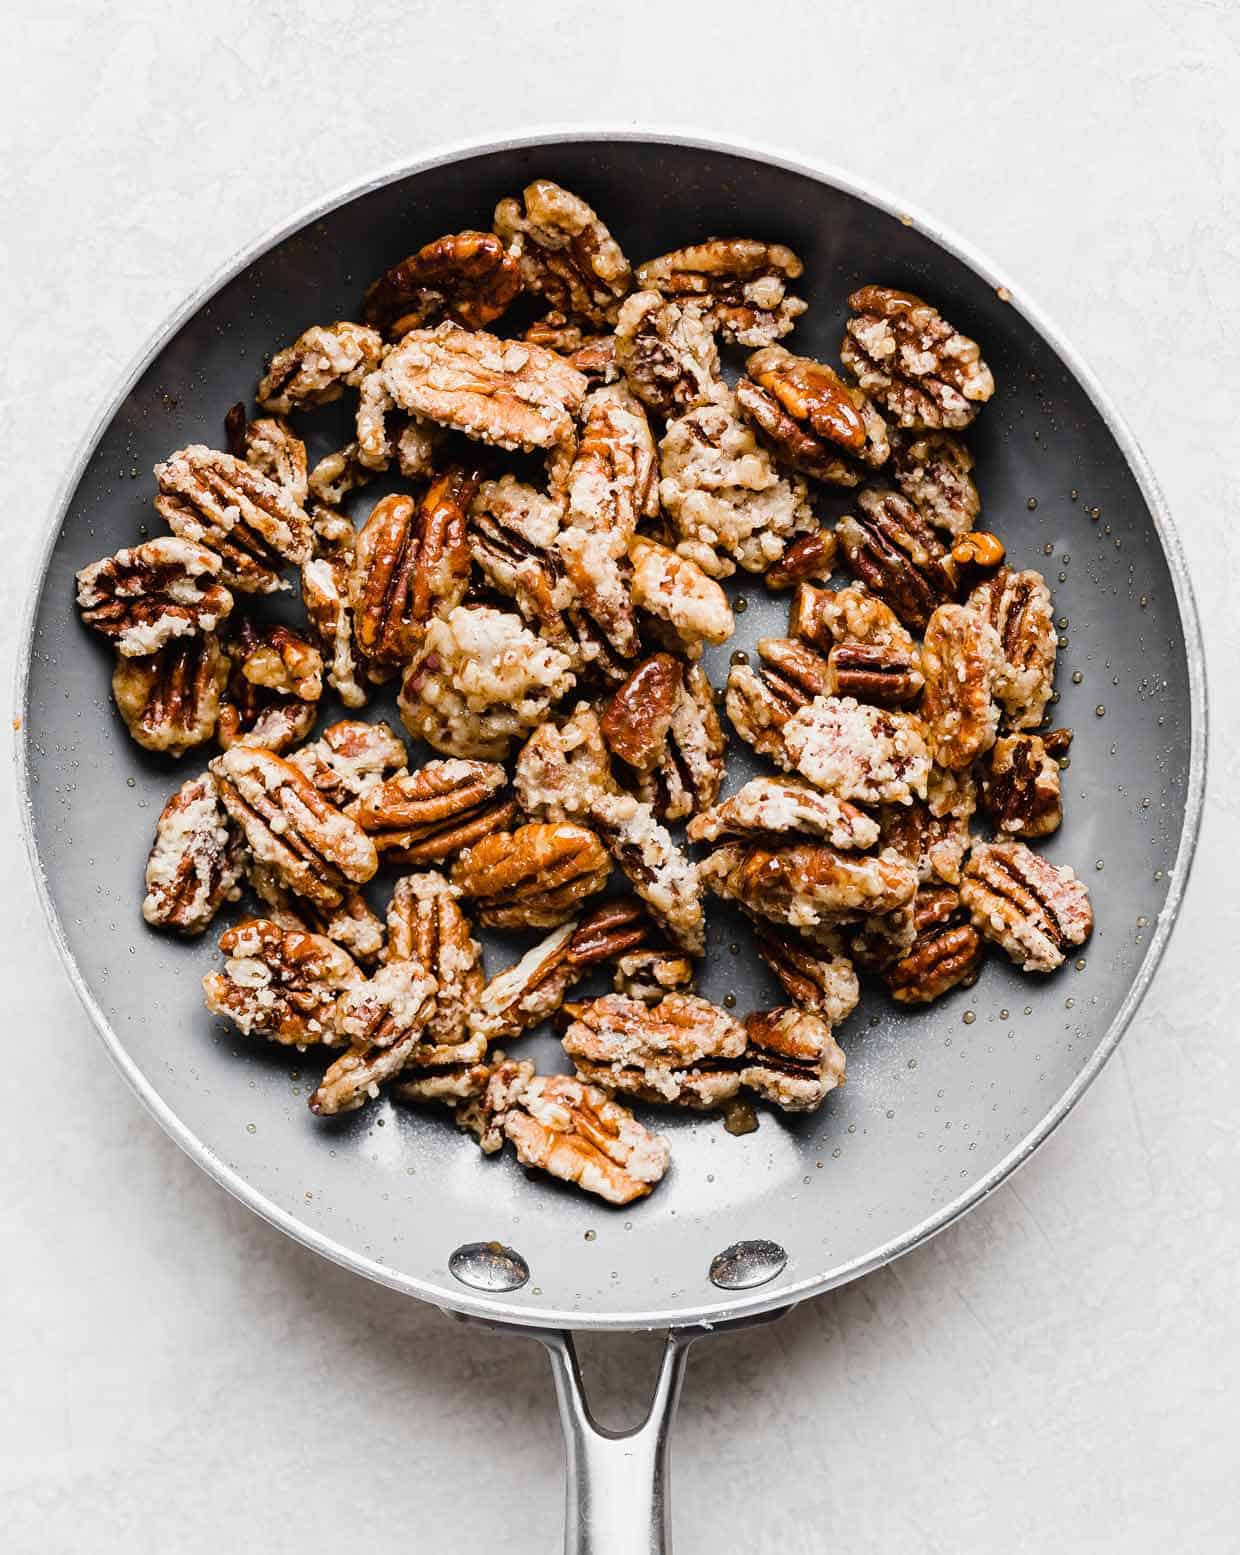 Sugared pecans in a gray skillet.